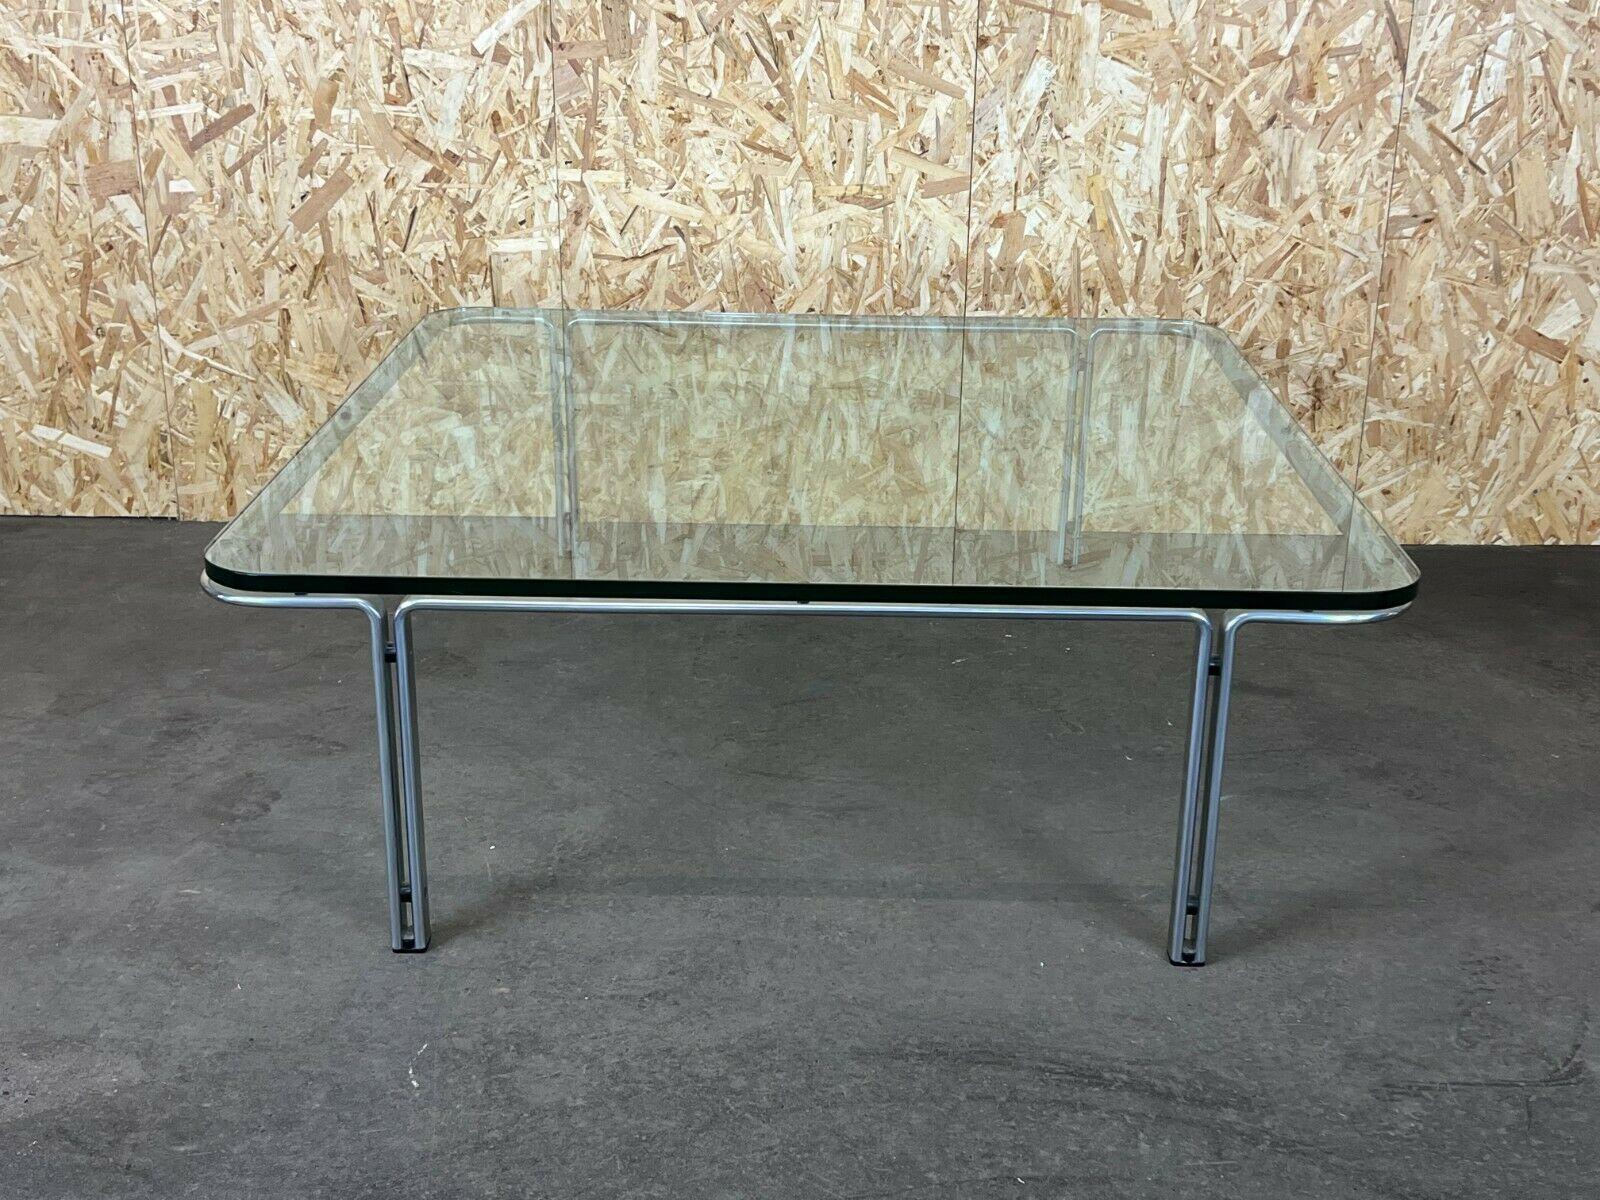 60s 70s Horst Brüning Coffee Table Kill International Coffee Table Glass Design In Fair Condition For Sale In Neuenkirchen, NI